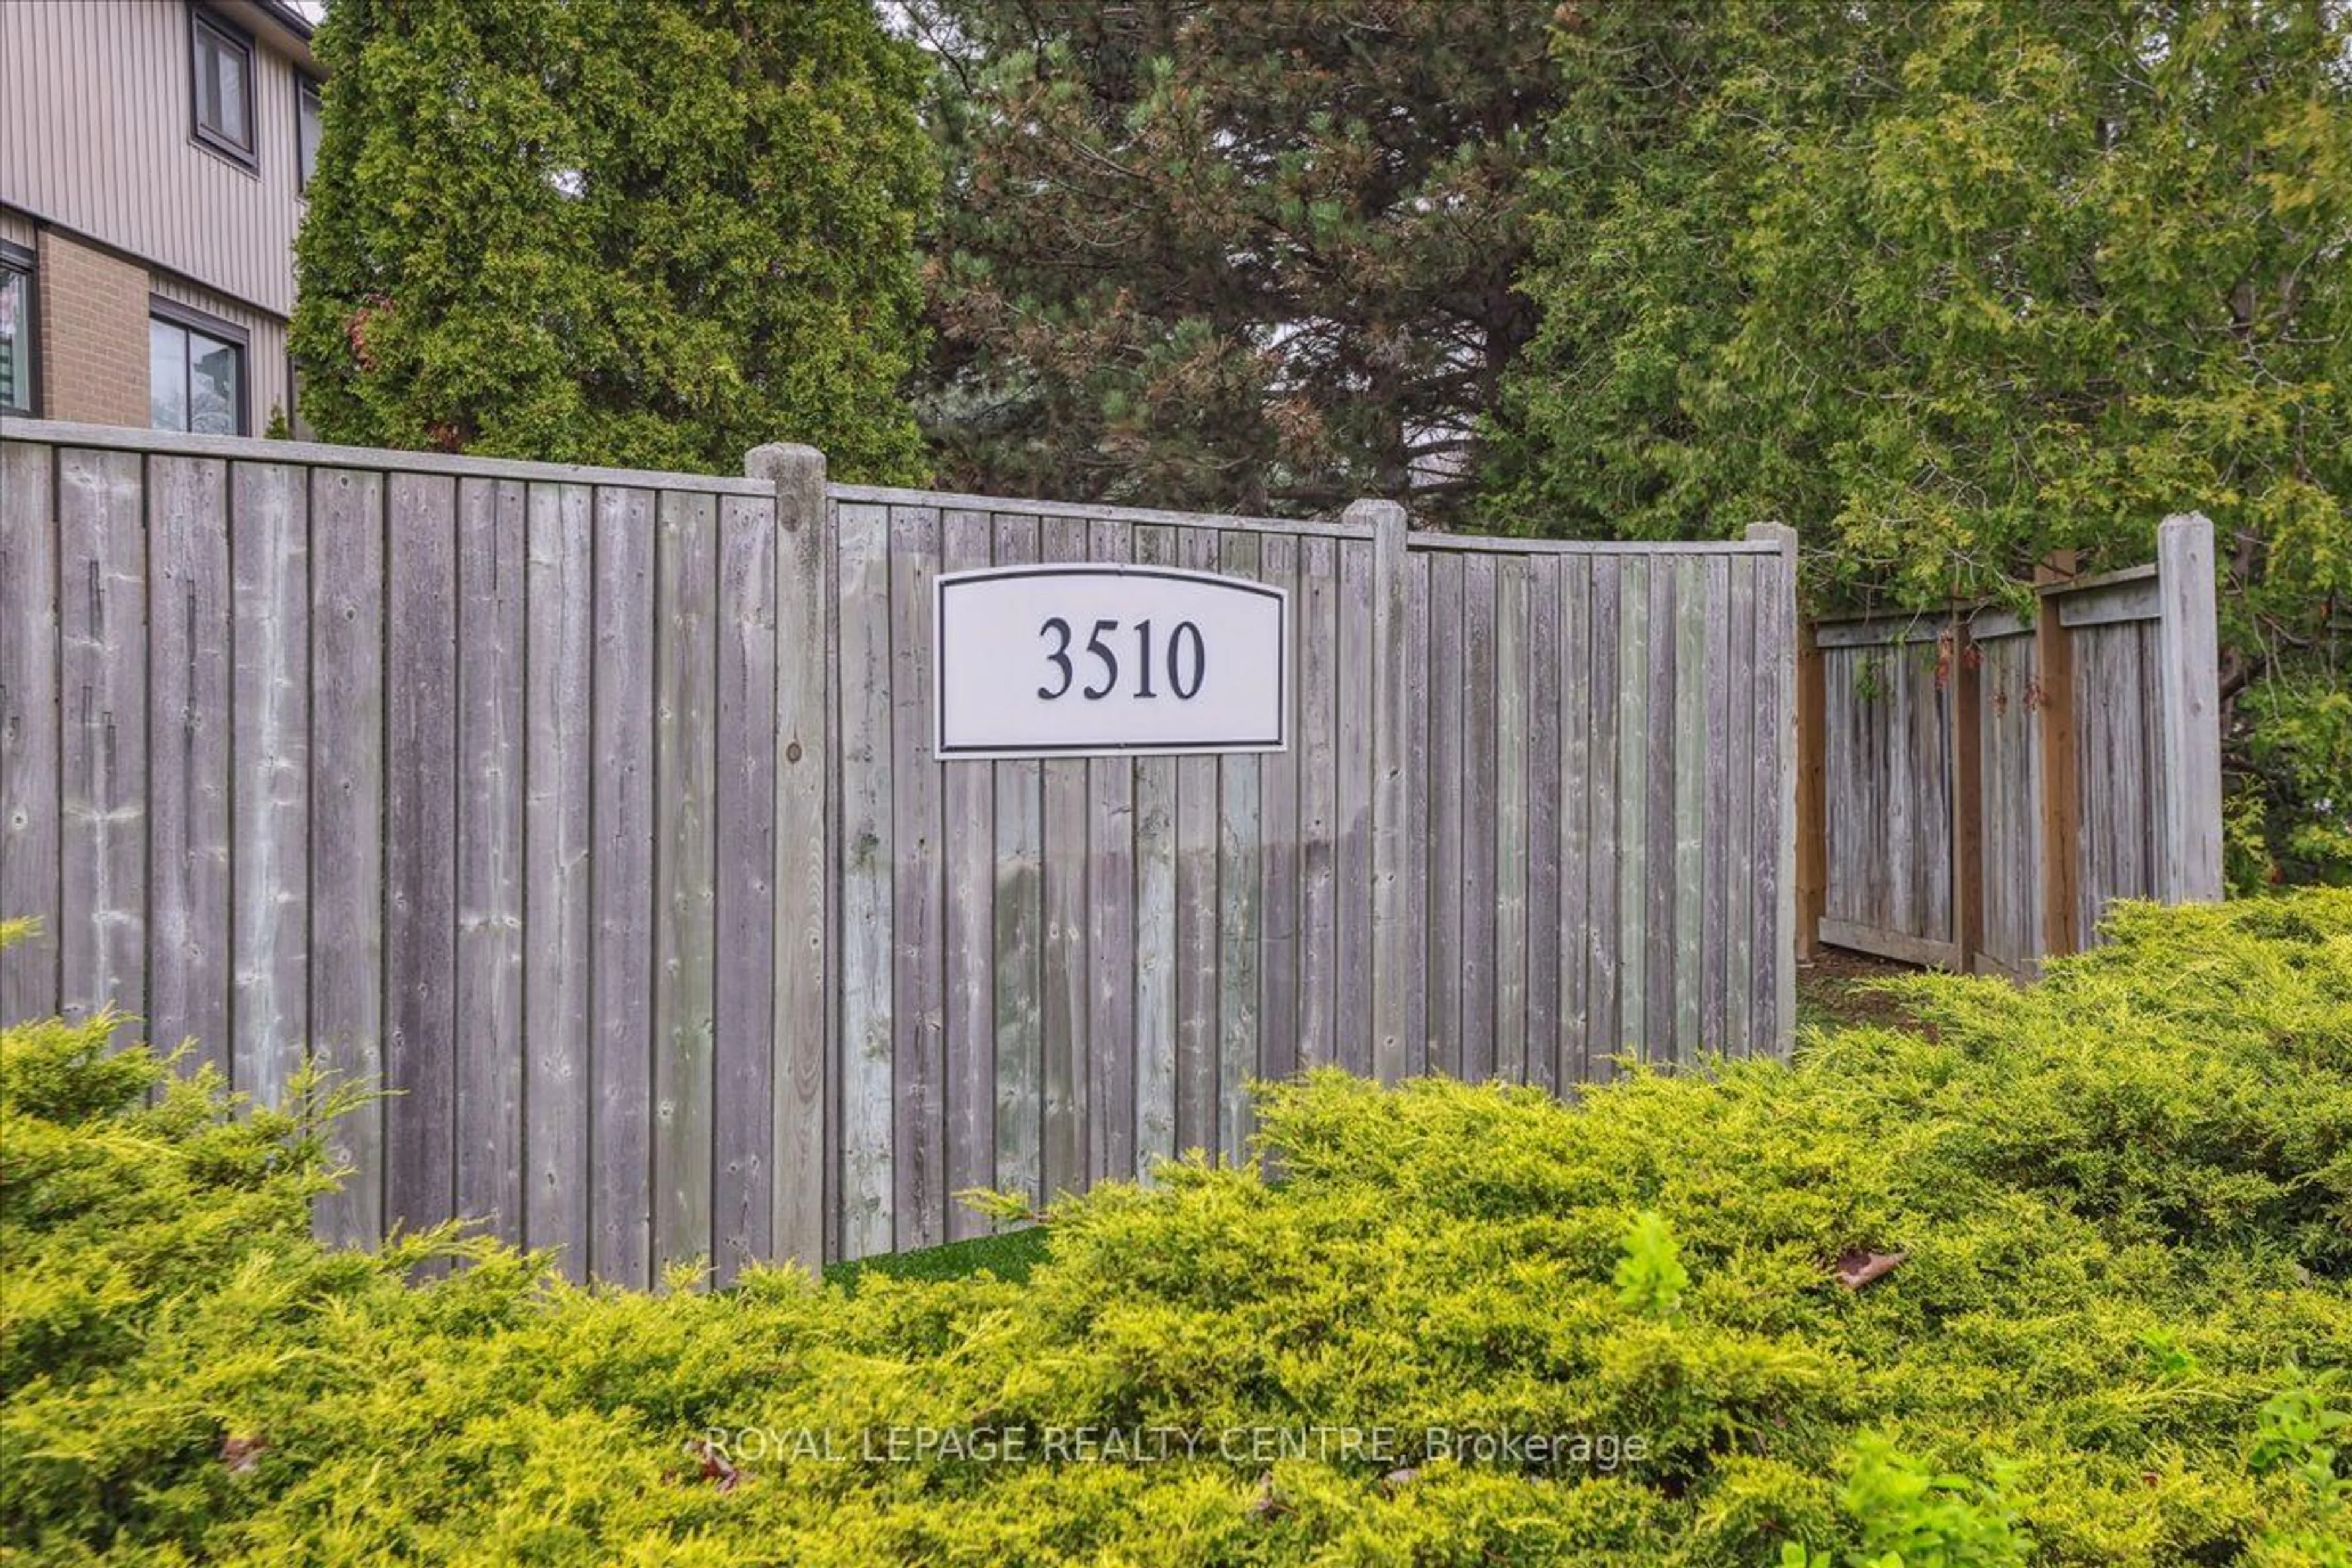 Fenced yard for 3510 South Millway #2, Mississauga Ontario L5L 3T9